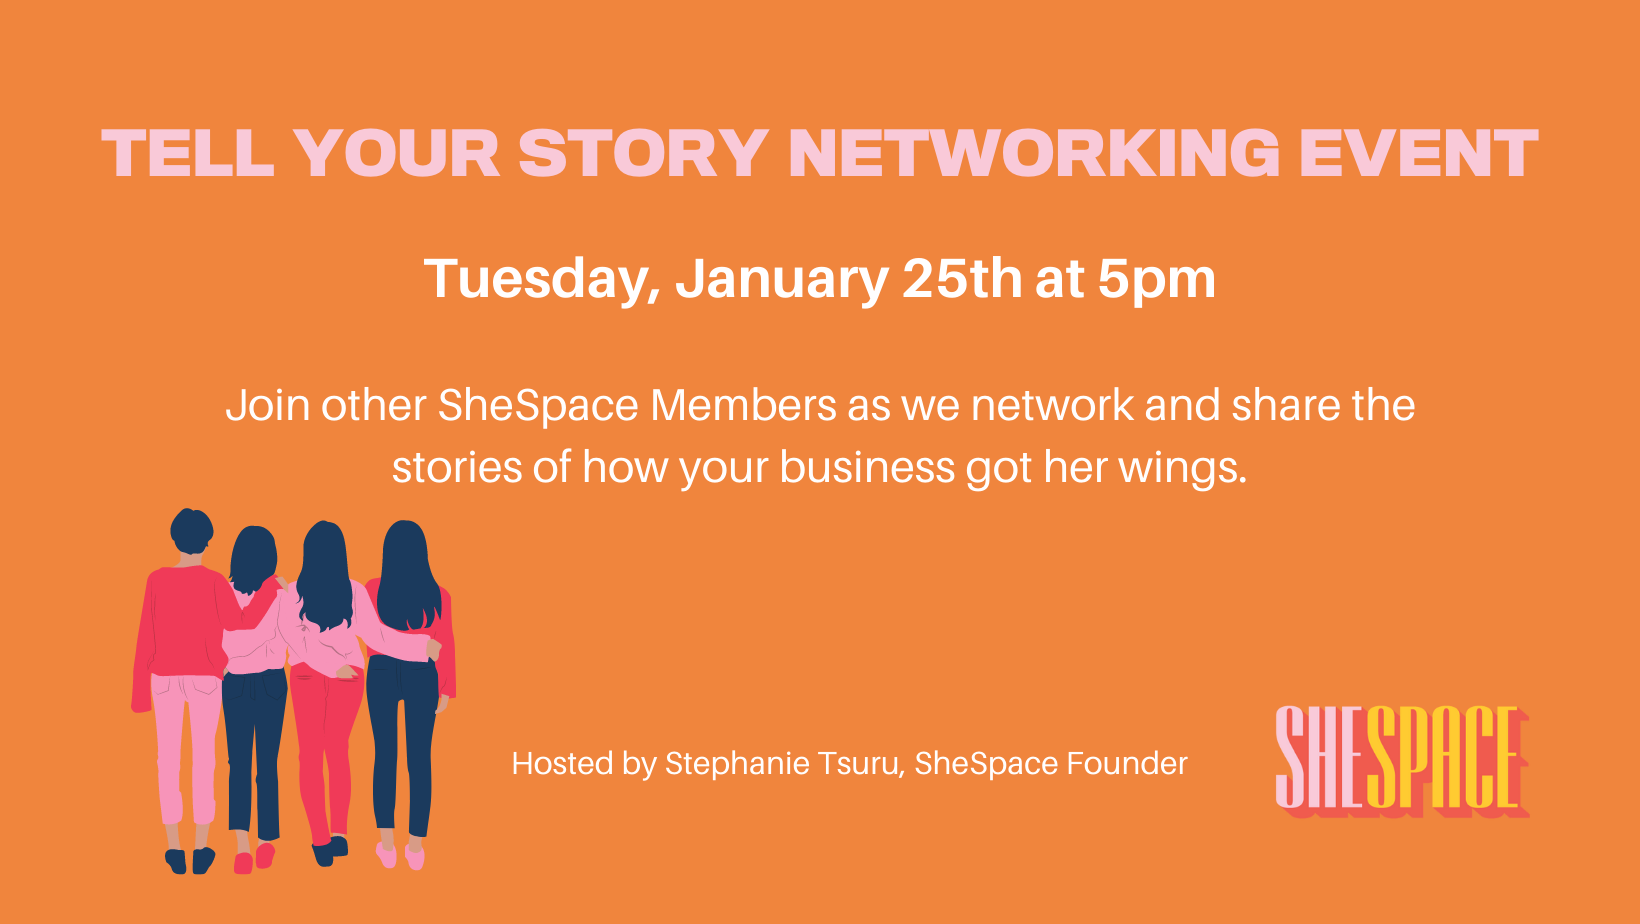 Tell your story networking event